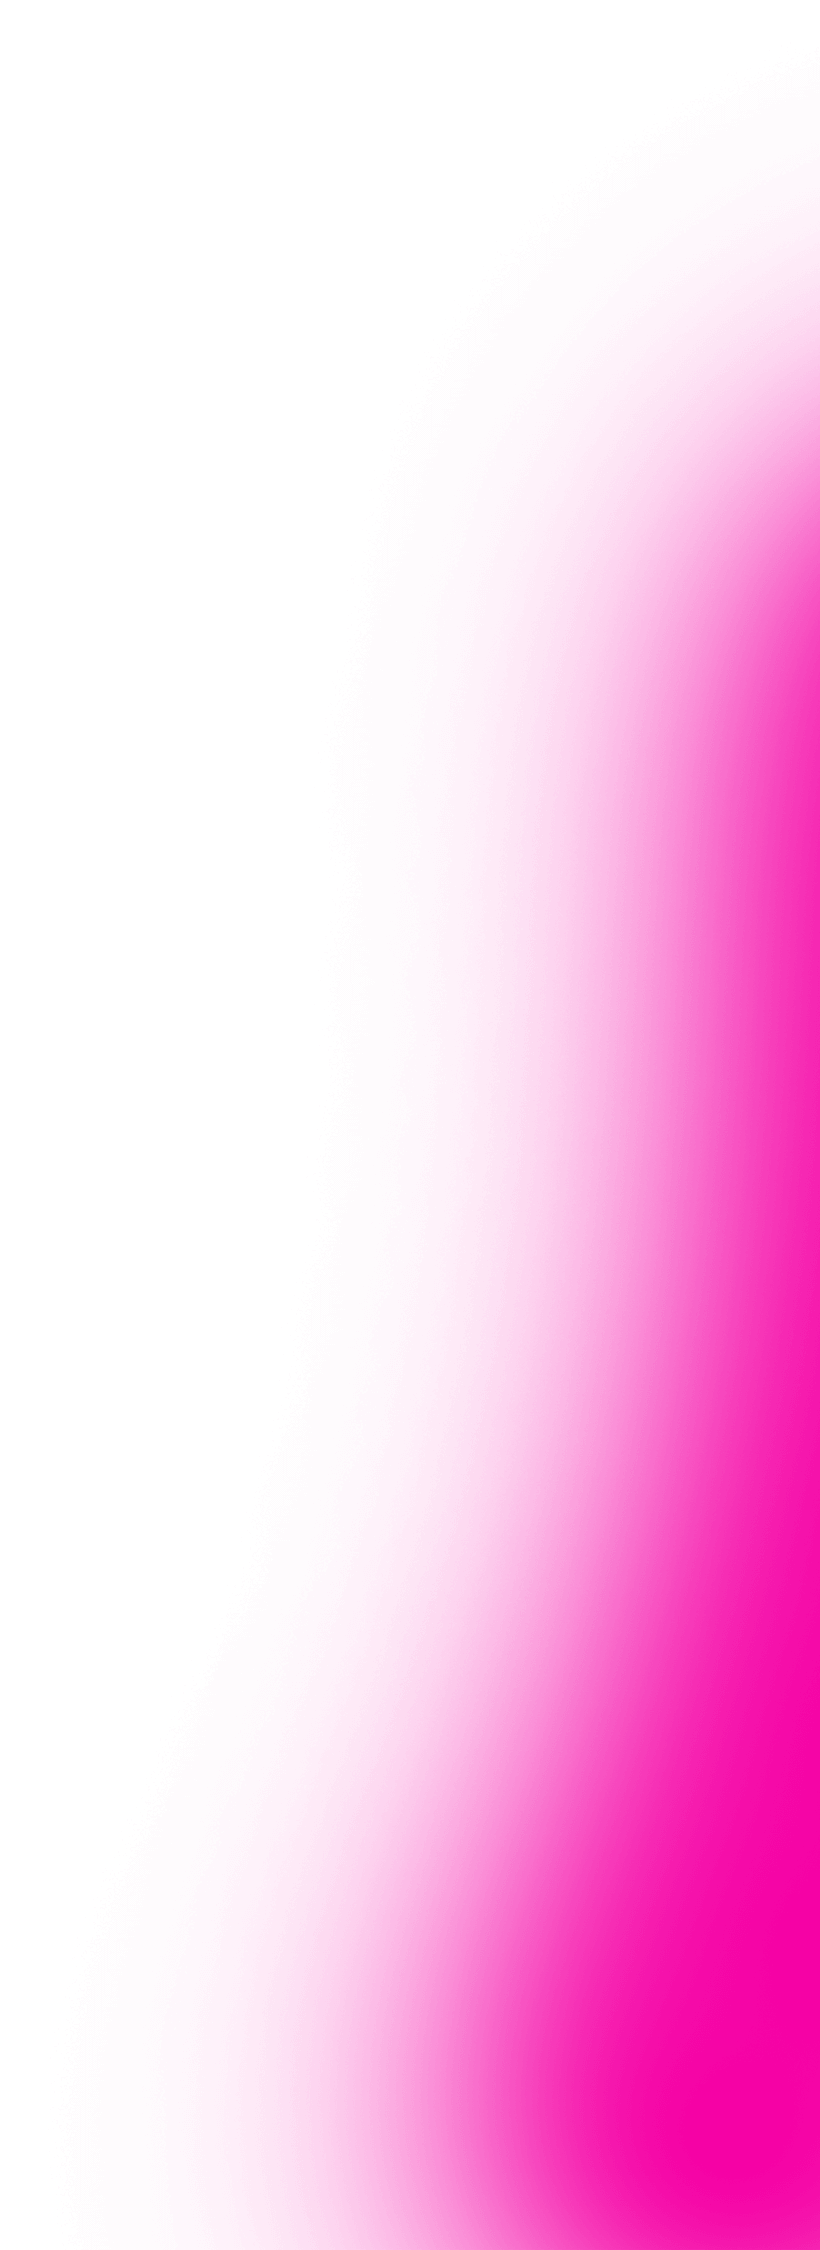 32369-layer-12-16660045586135.png